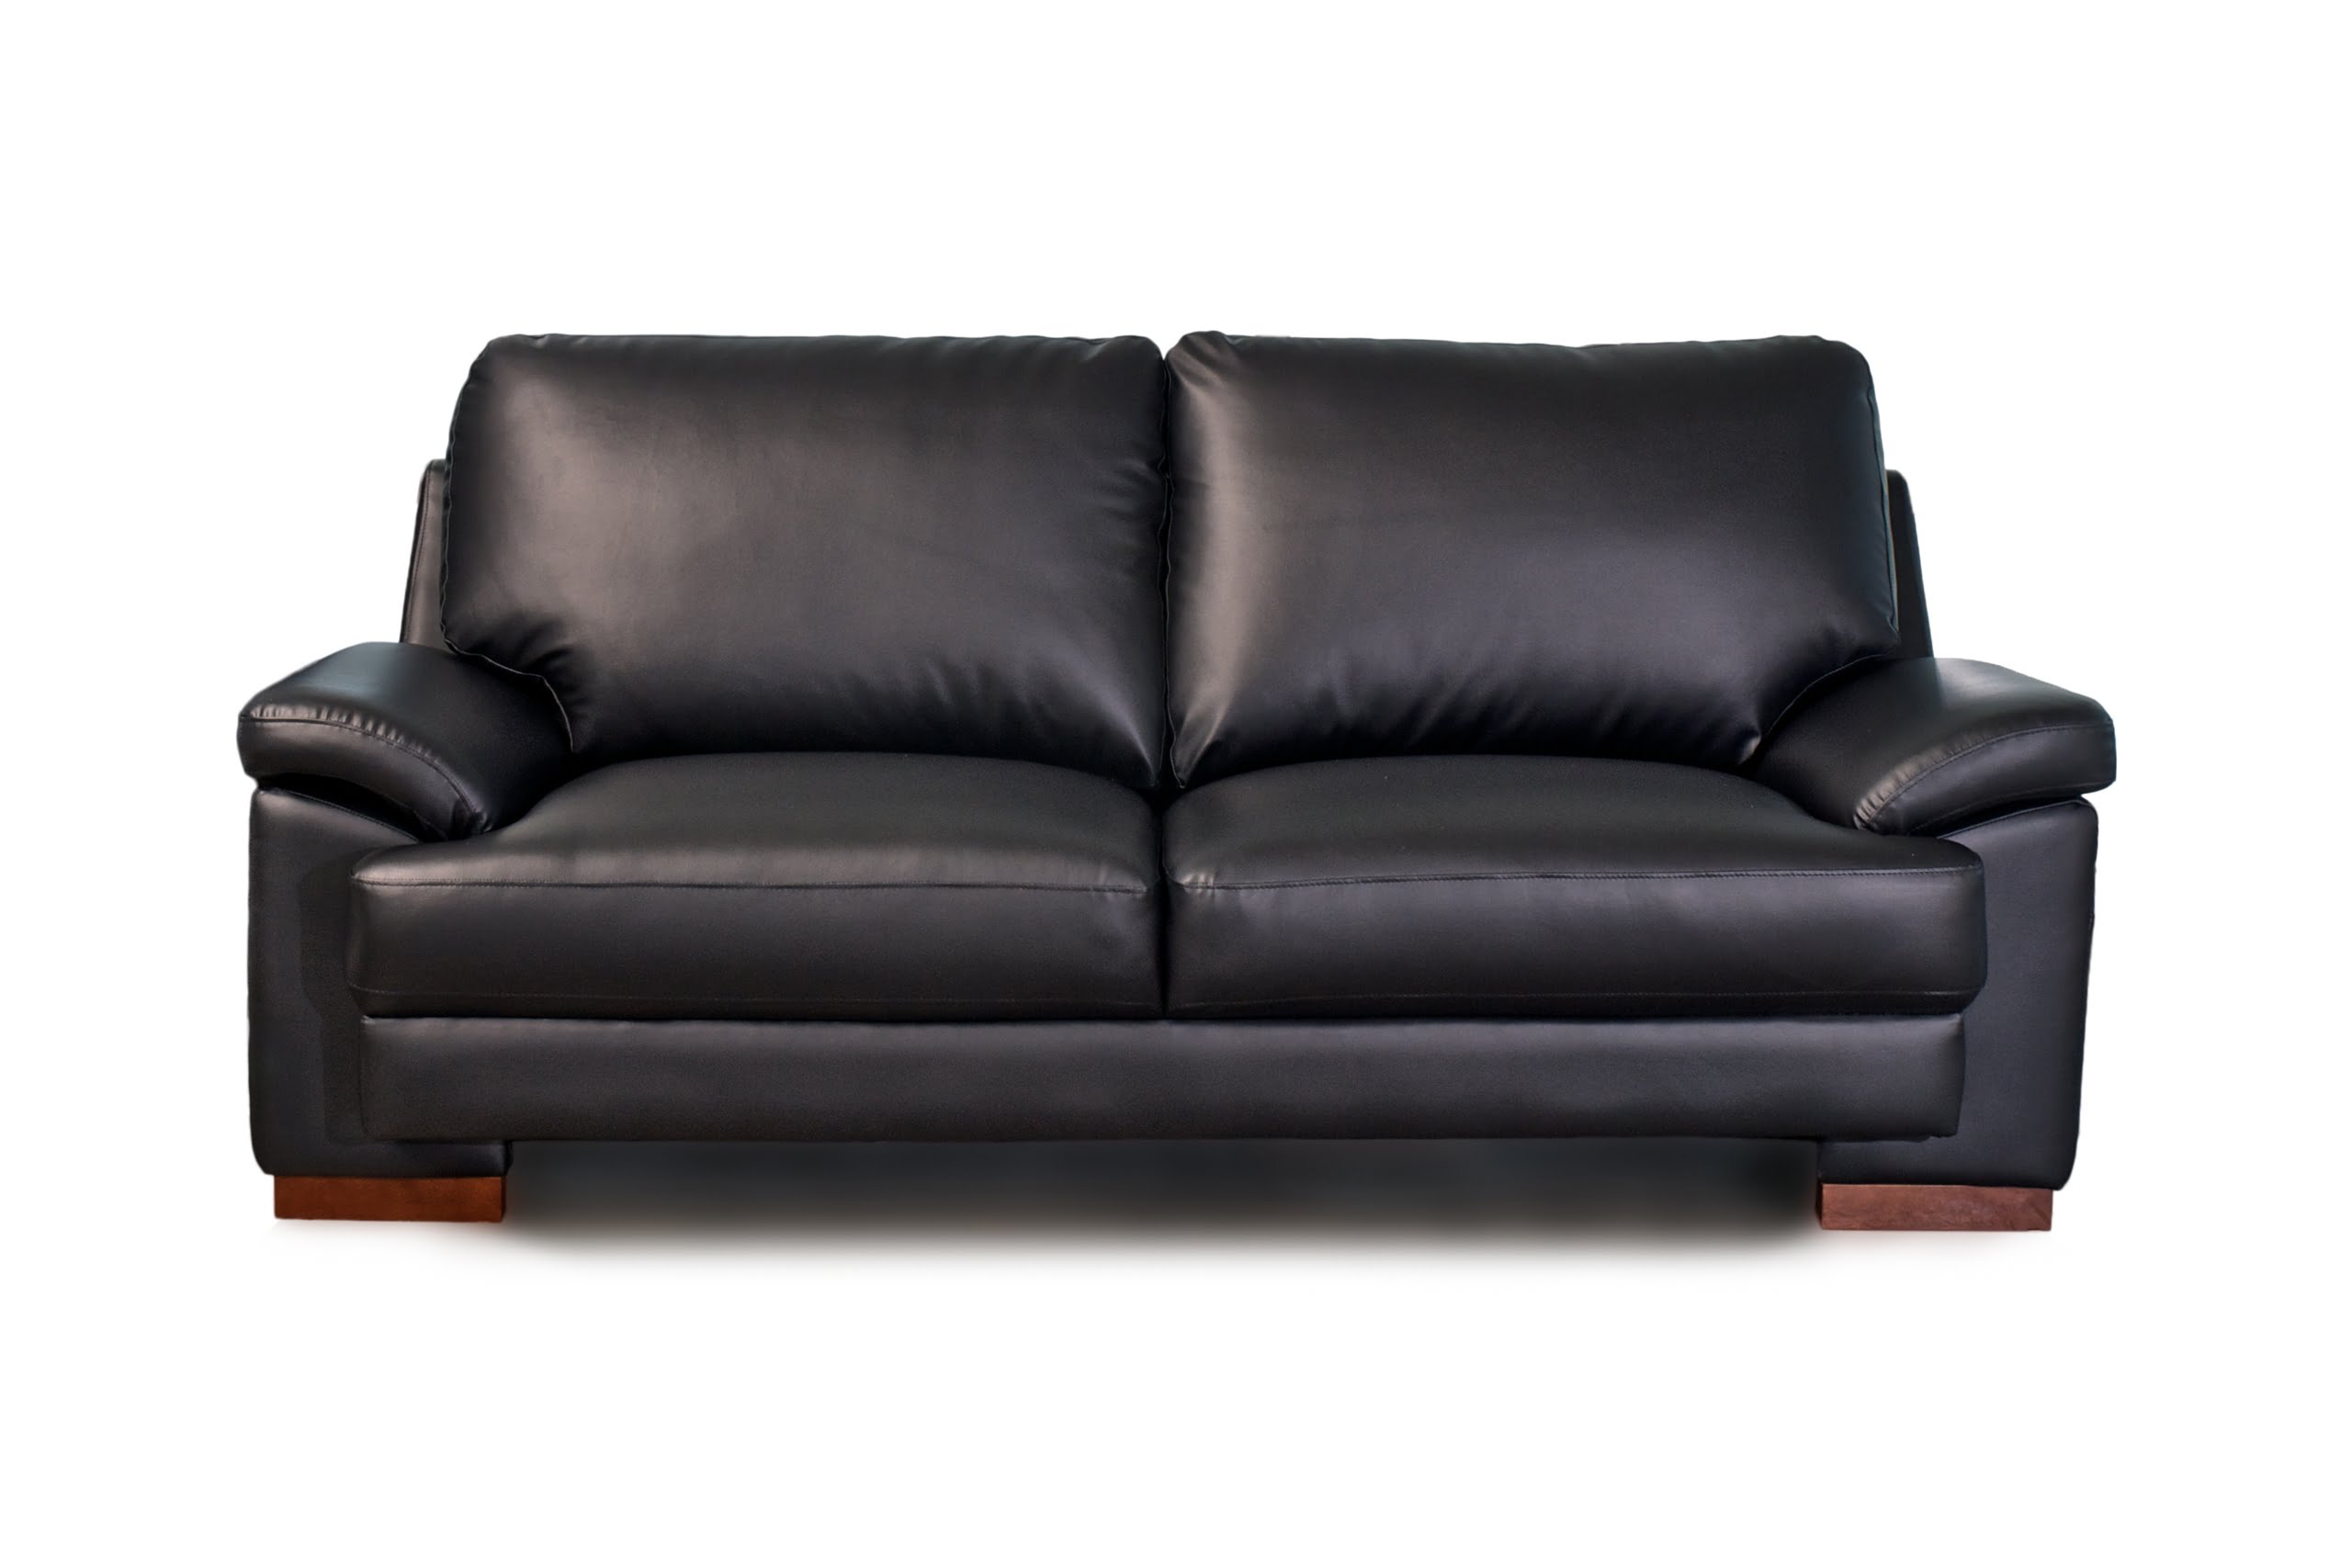 best wall color for black leather sofa